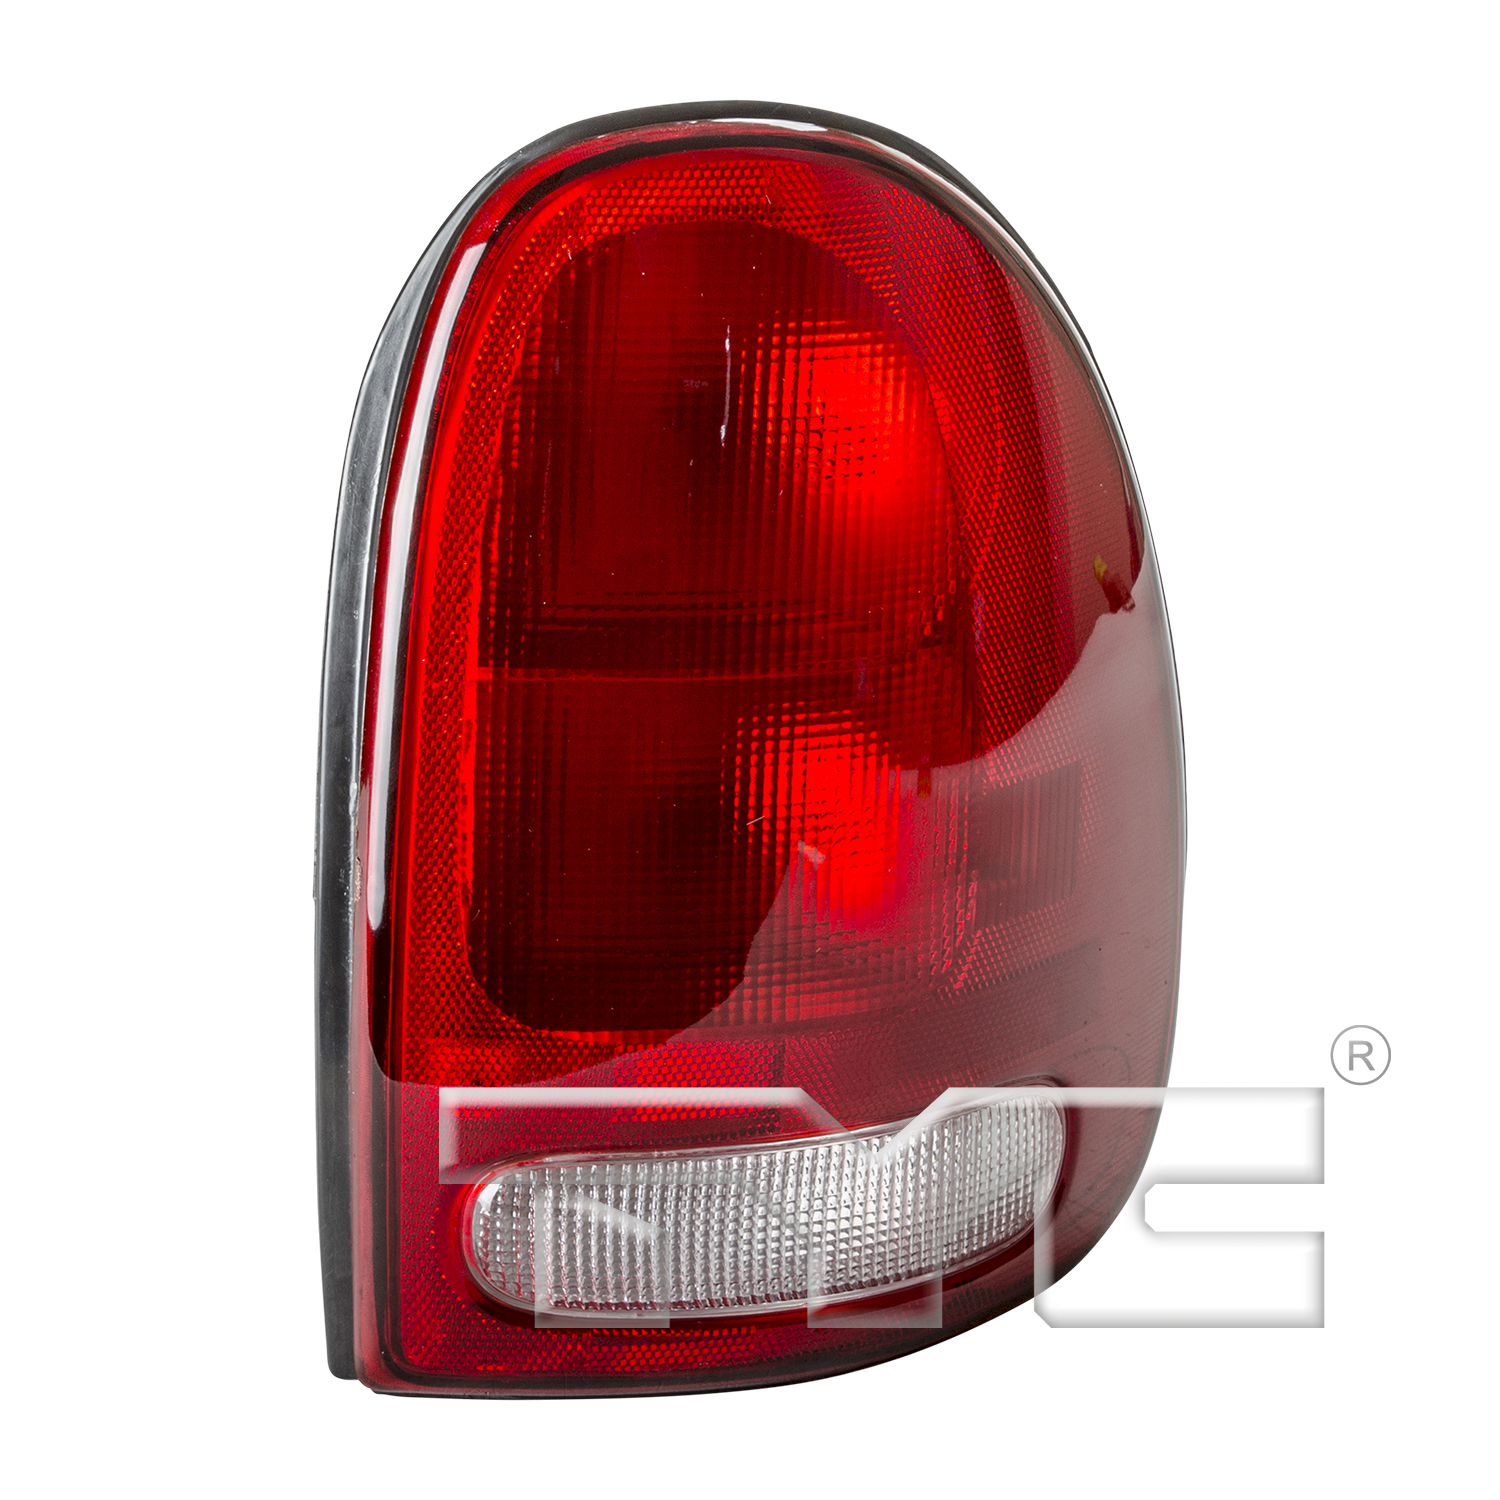 Aftermarket TAILLIGHTS for CHRYSLER - TOWN & COUNTRY, TOWN & COUNTRY,96-00,RT Taillamp assy